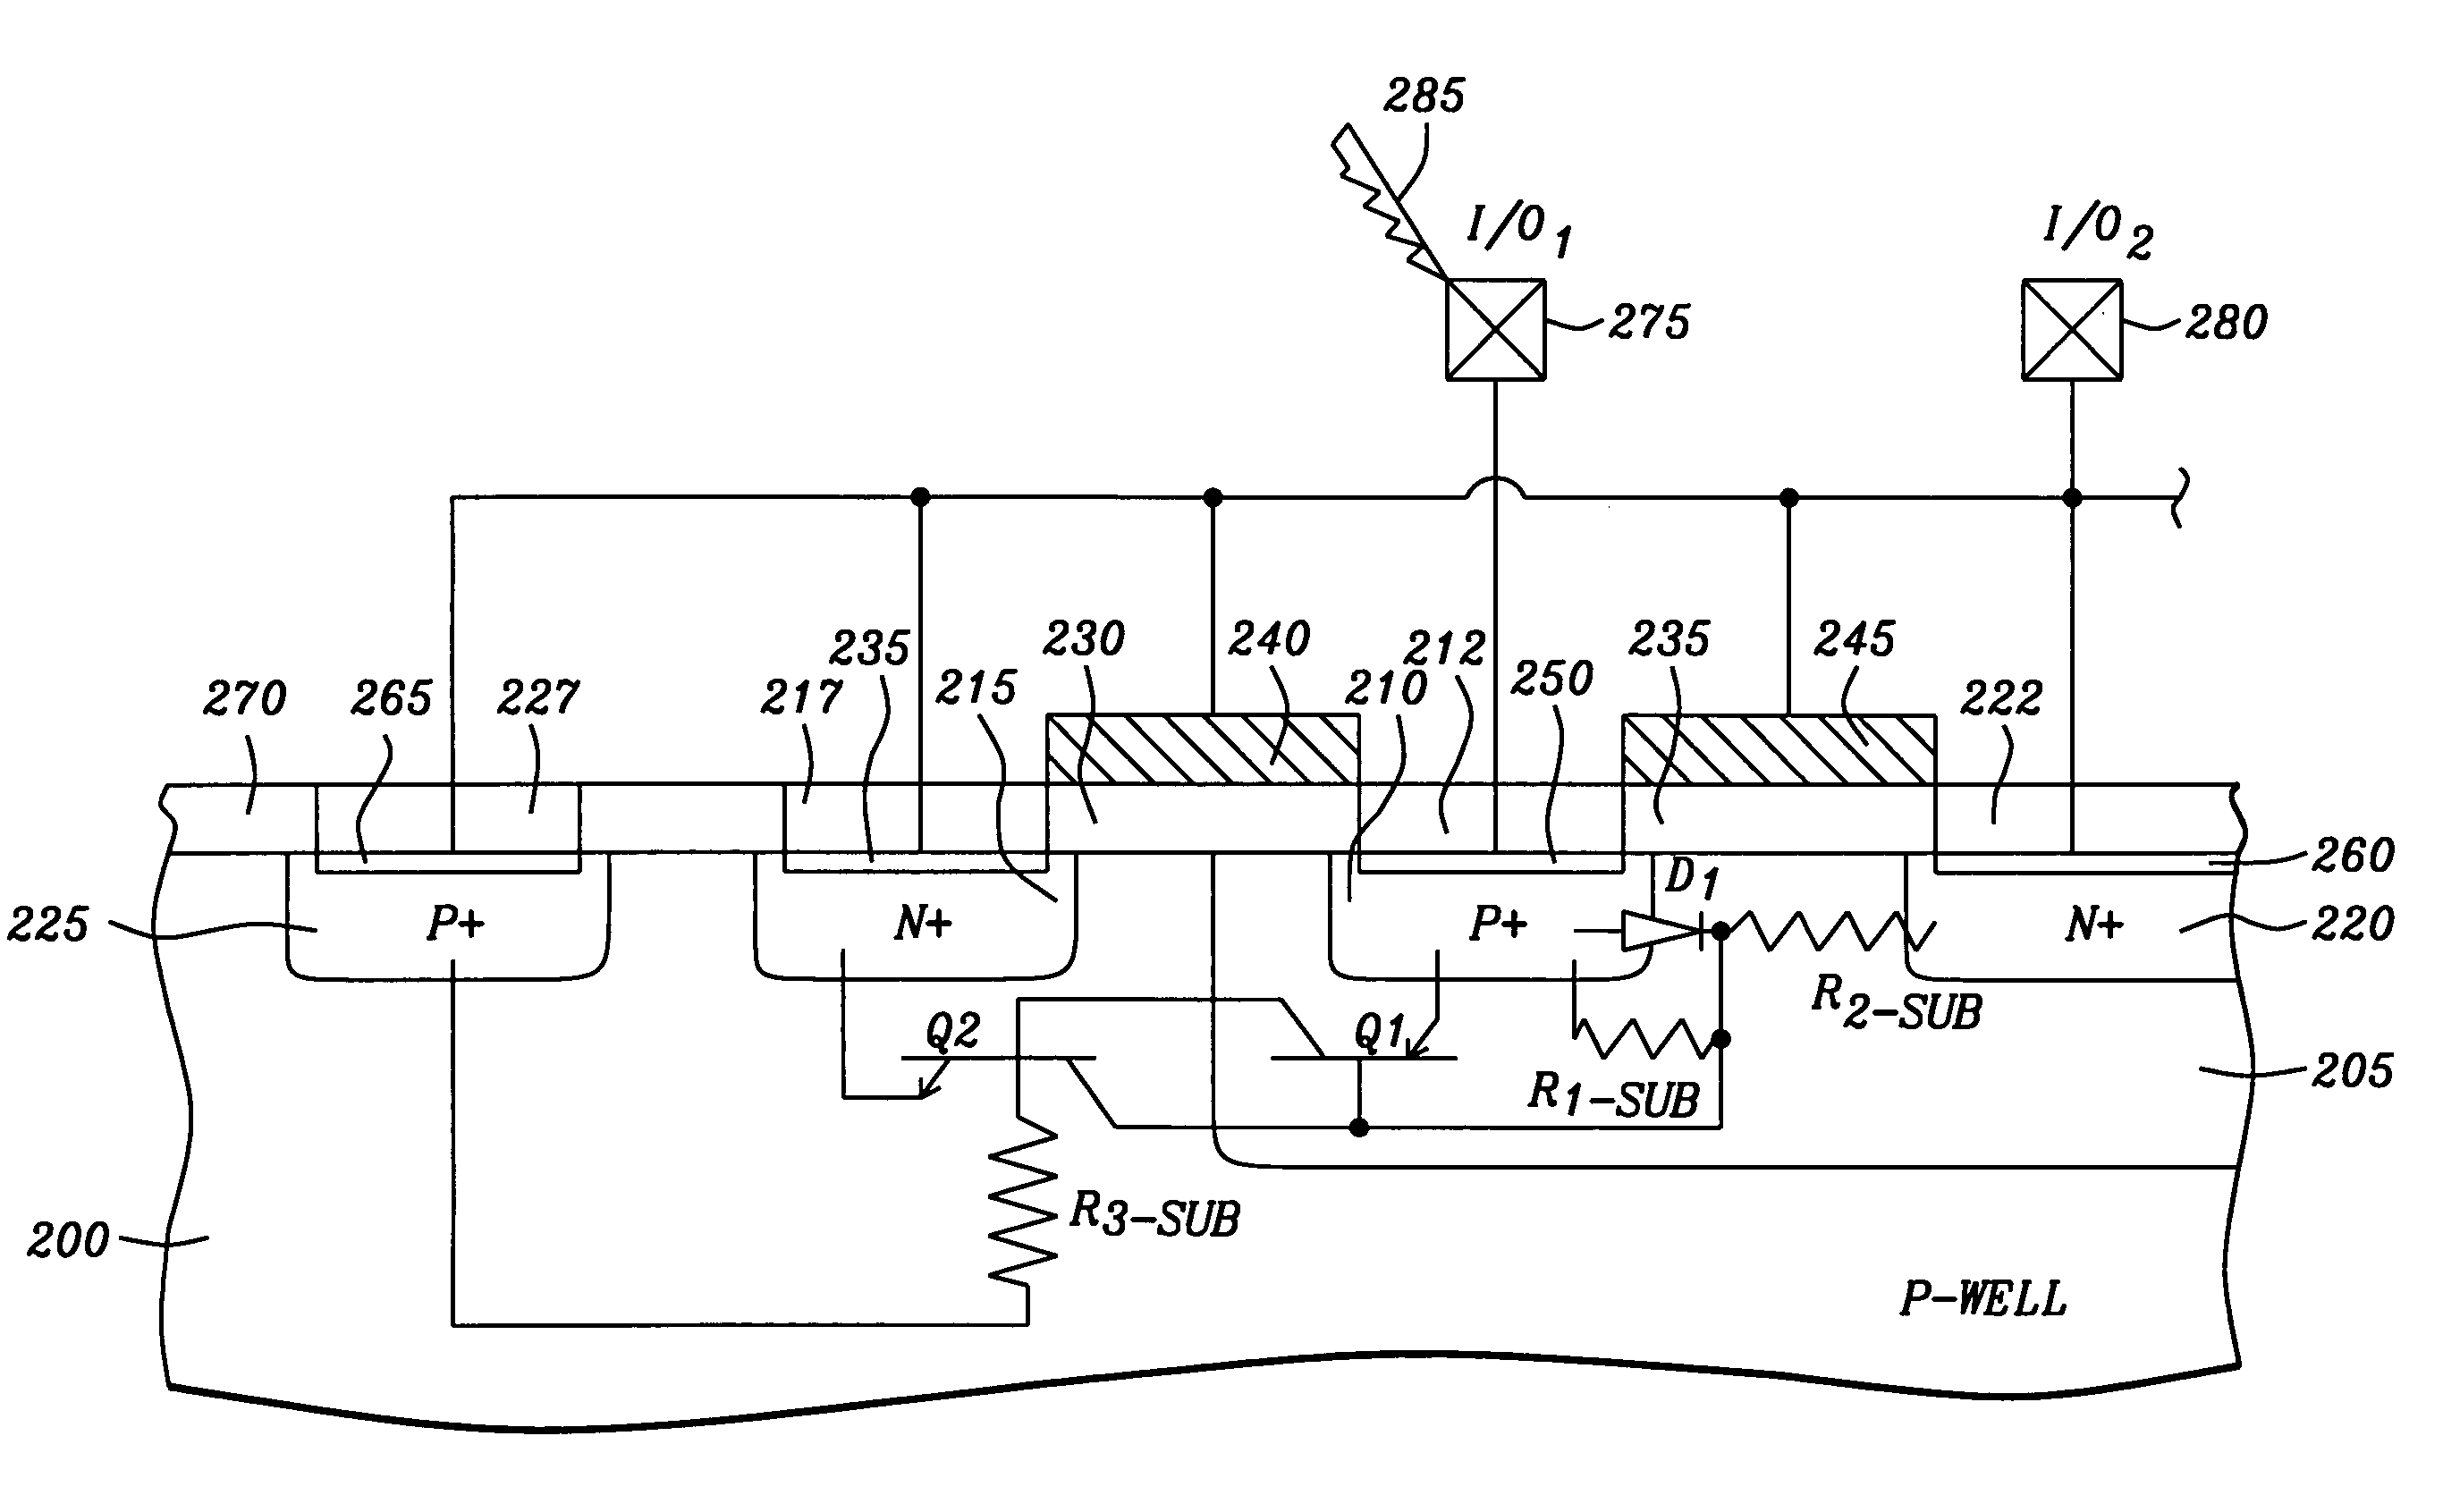 Method for forming an ESD protection circuit